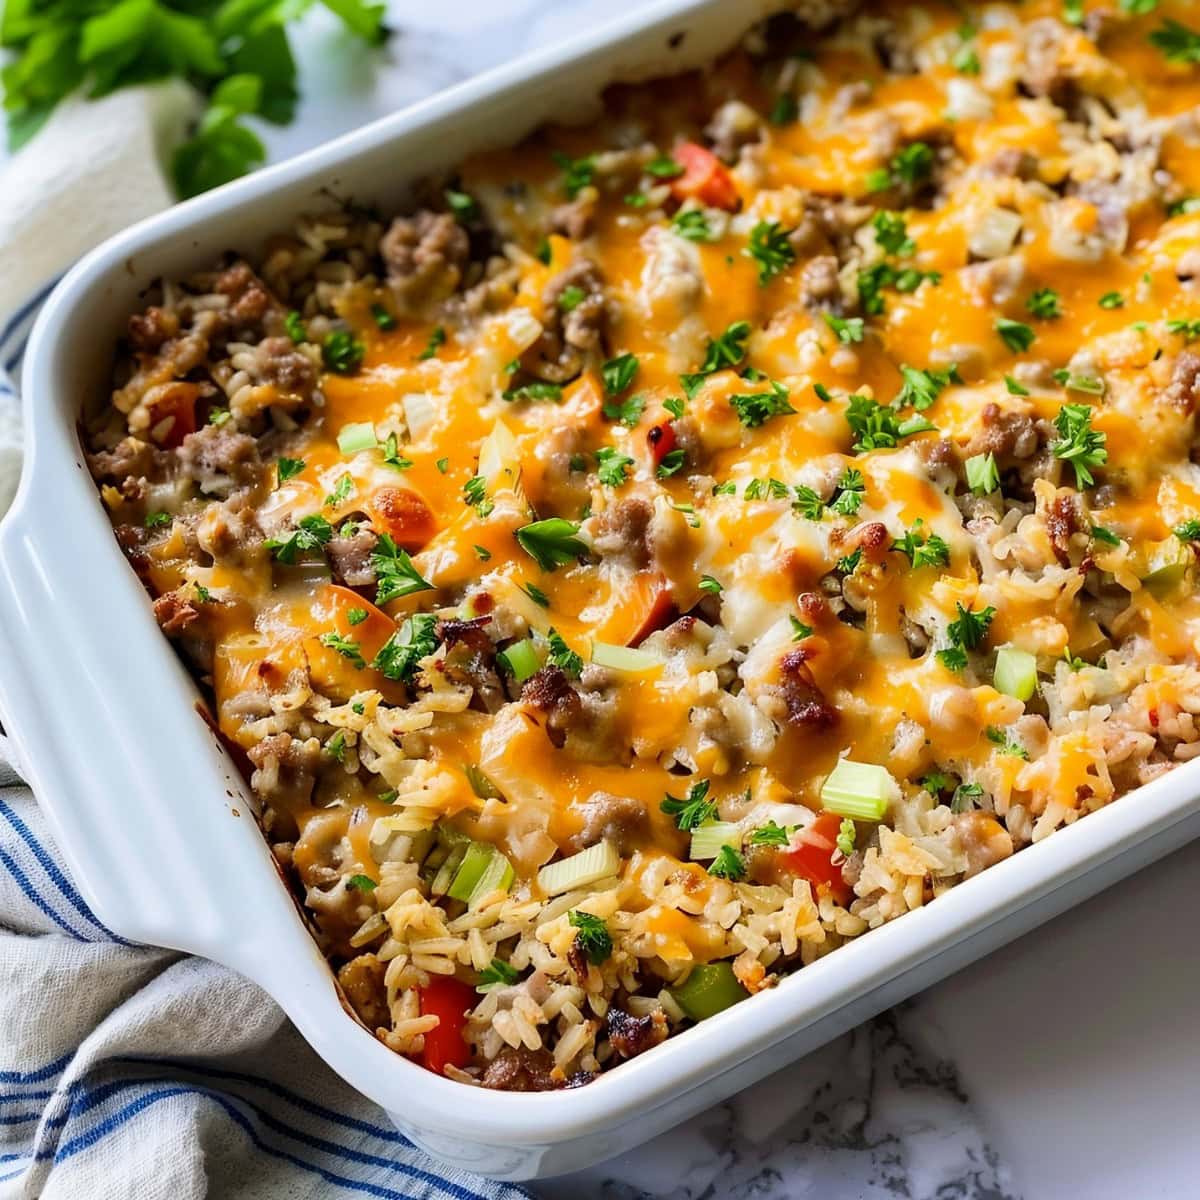 Loaded homemade  sausage and rice casserole with celery, bell peppers and cheese in a 9x13 casserole dish